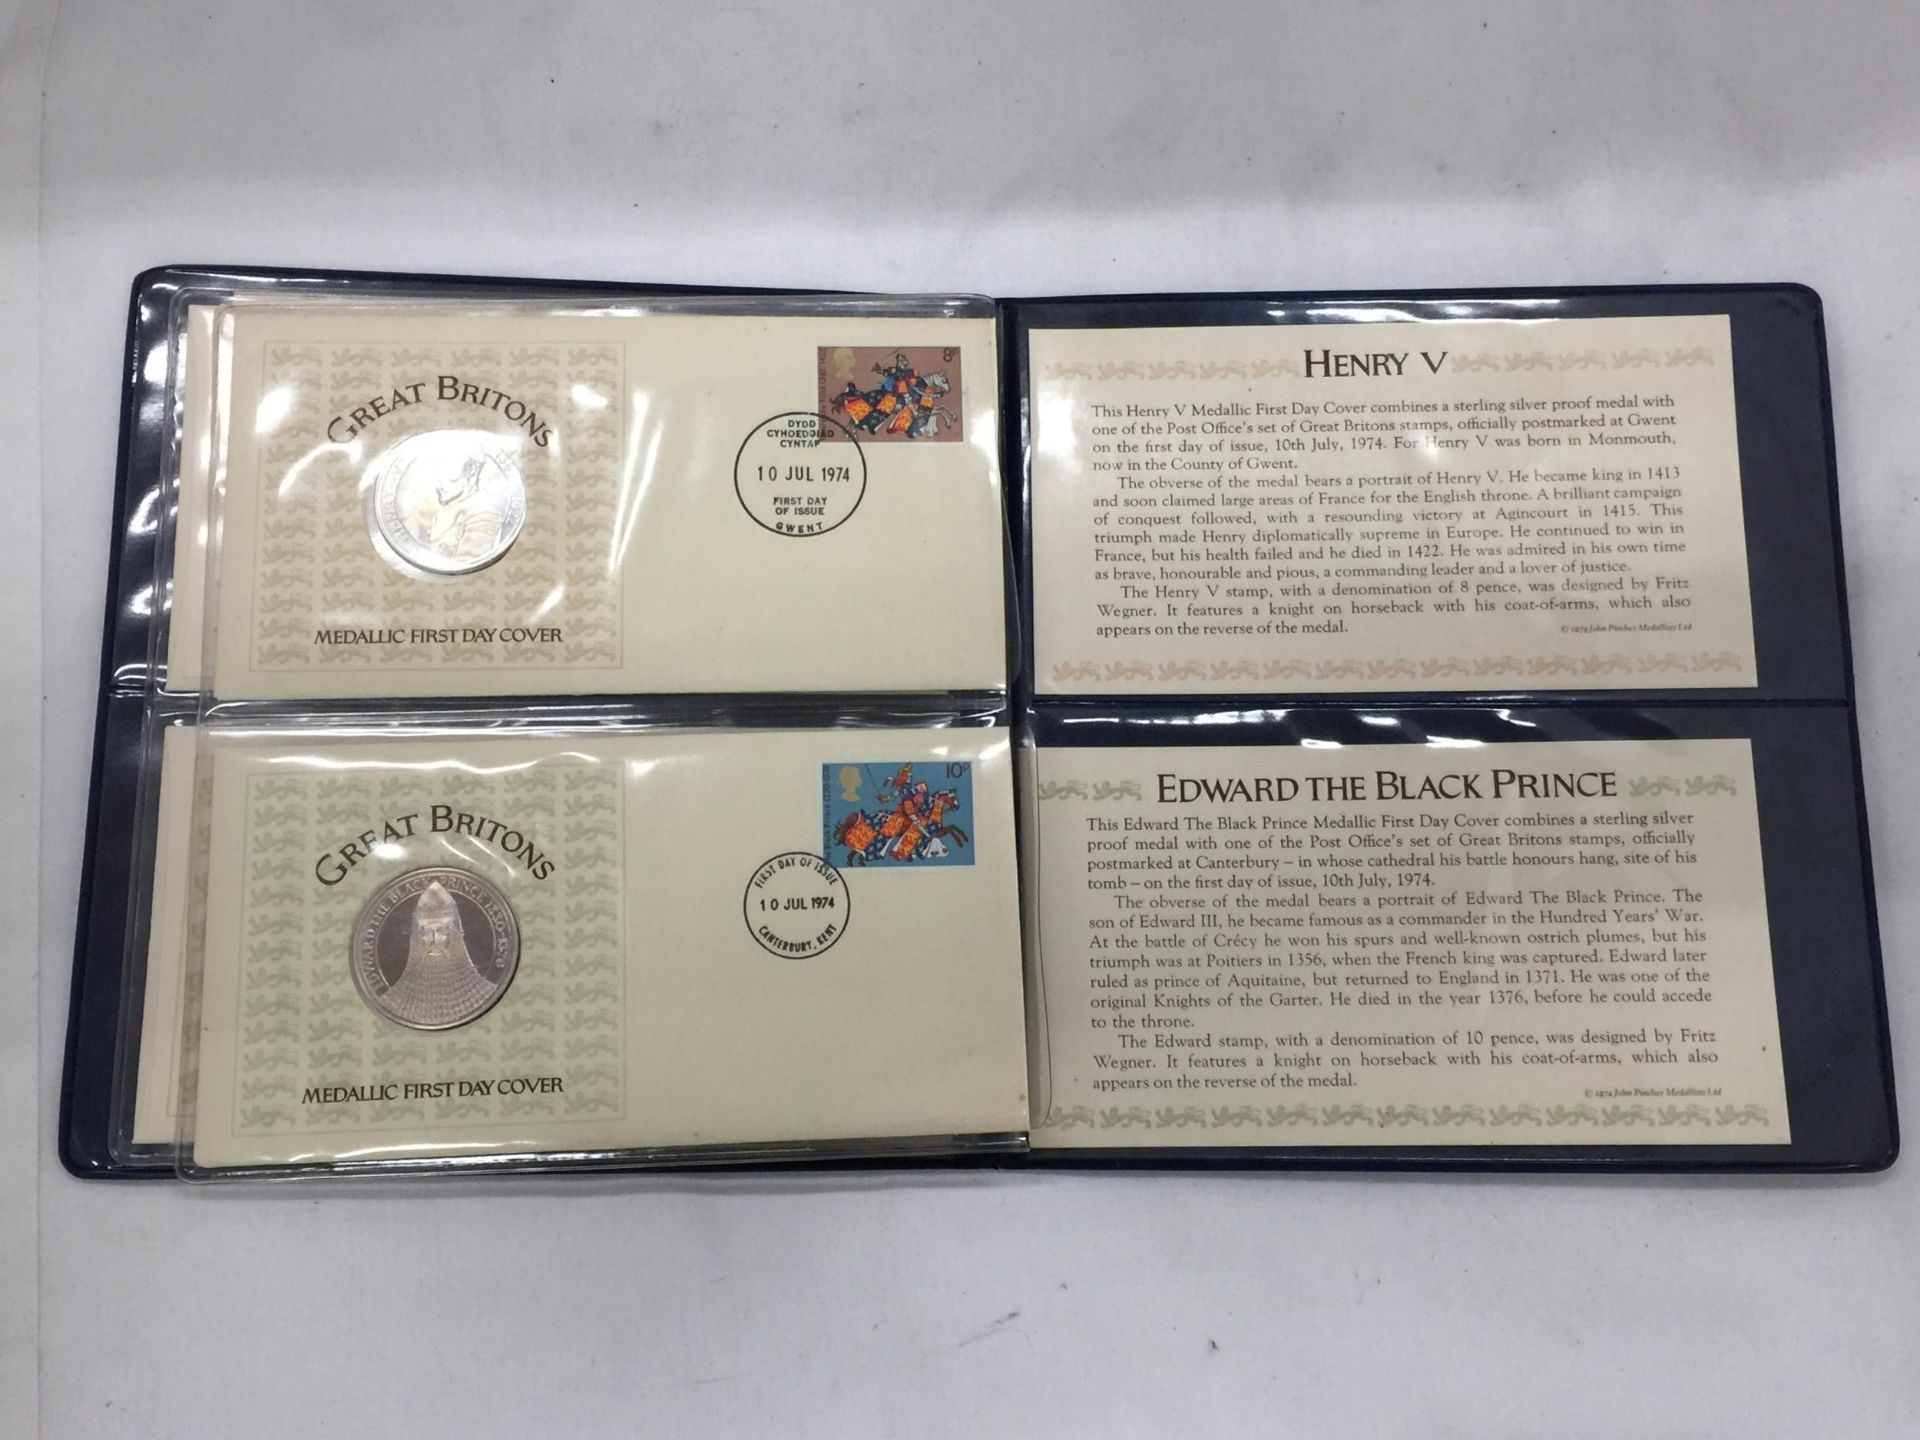 A STERLING SILVER GREAT BRITAINS FIRST DAY COVER COIN SET WITH ALBUM - Bild 3 aus 3